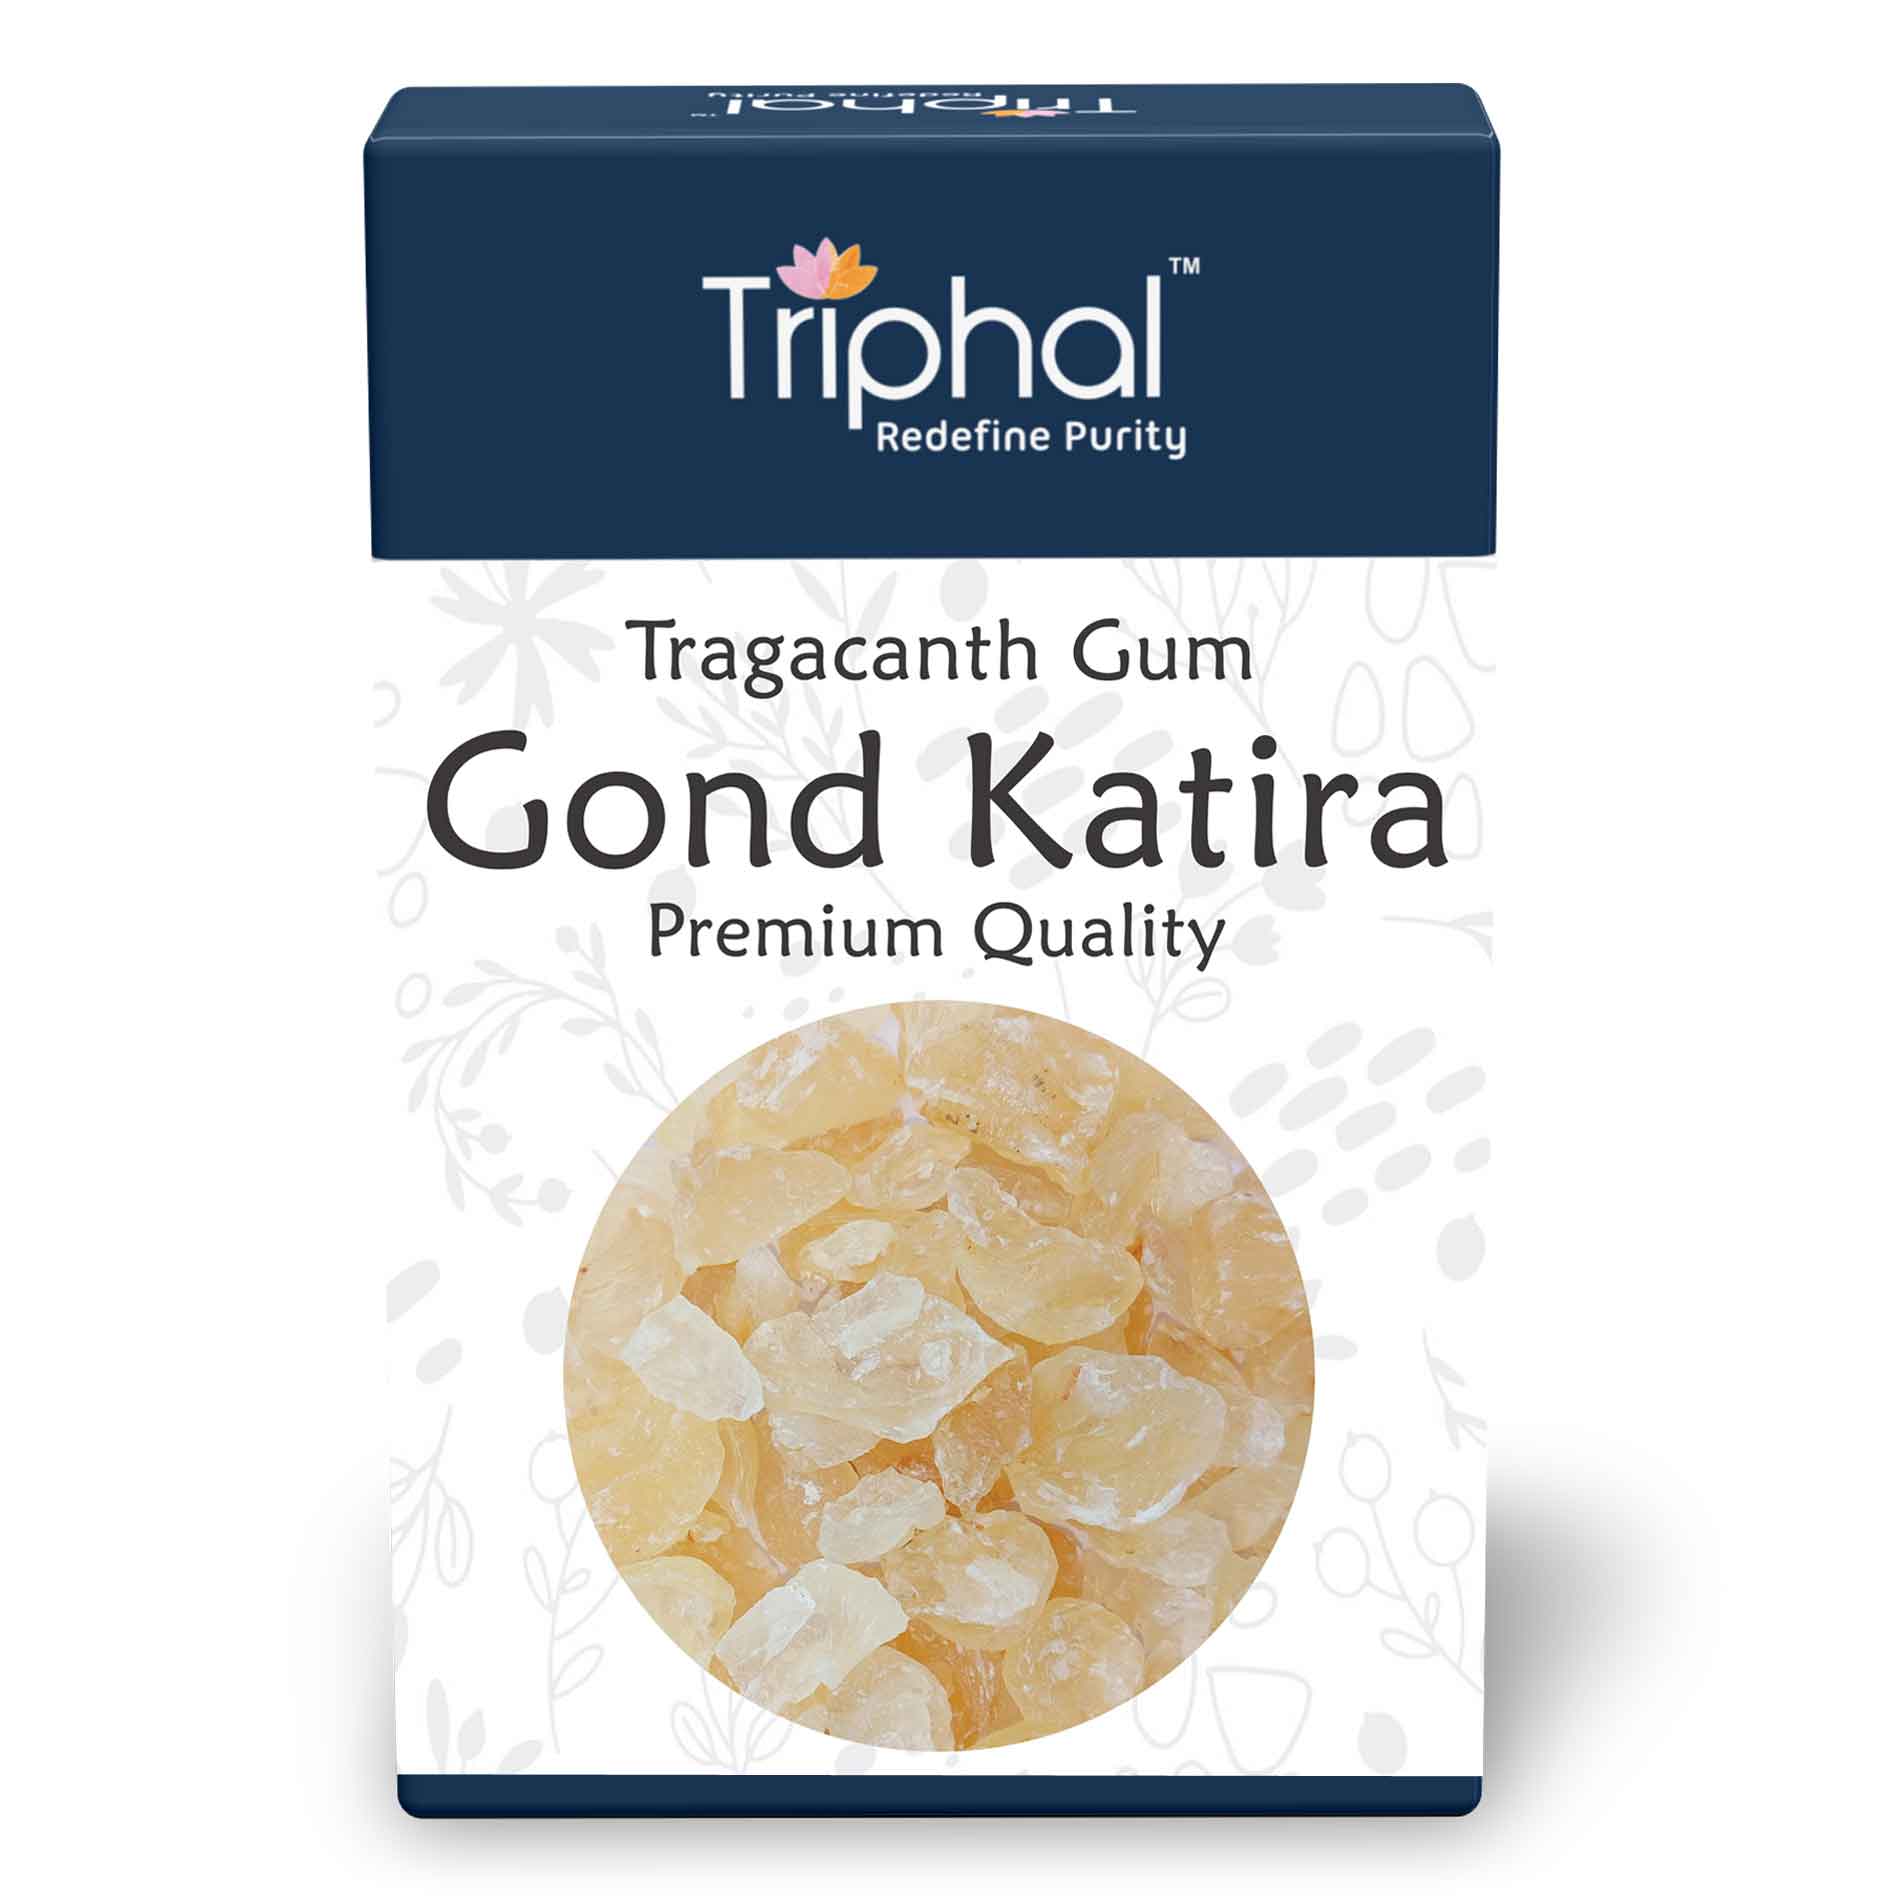 Gond katira for cooling properties, digestive health. Other names - Badam Pisin, Chahar Gond, Gond For Cooking